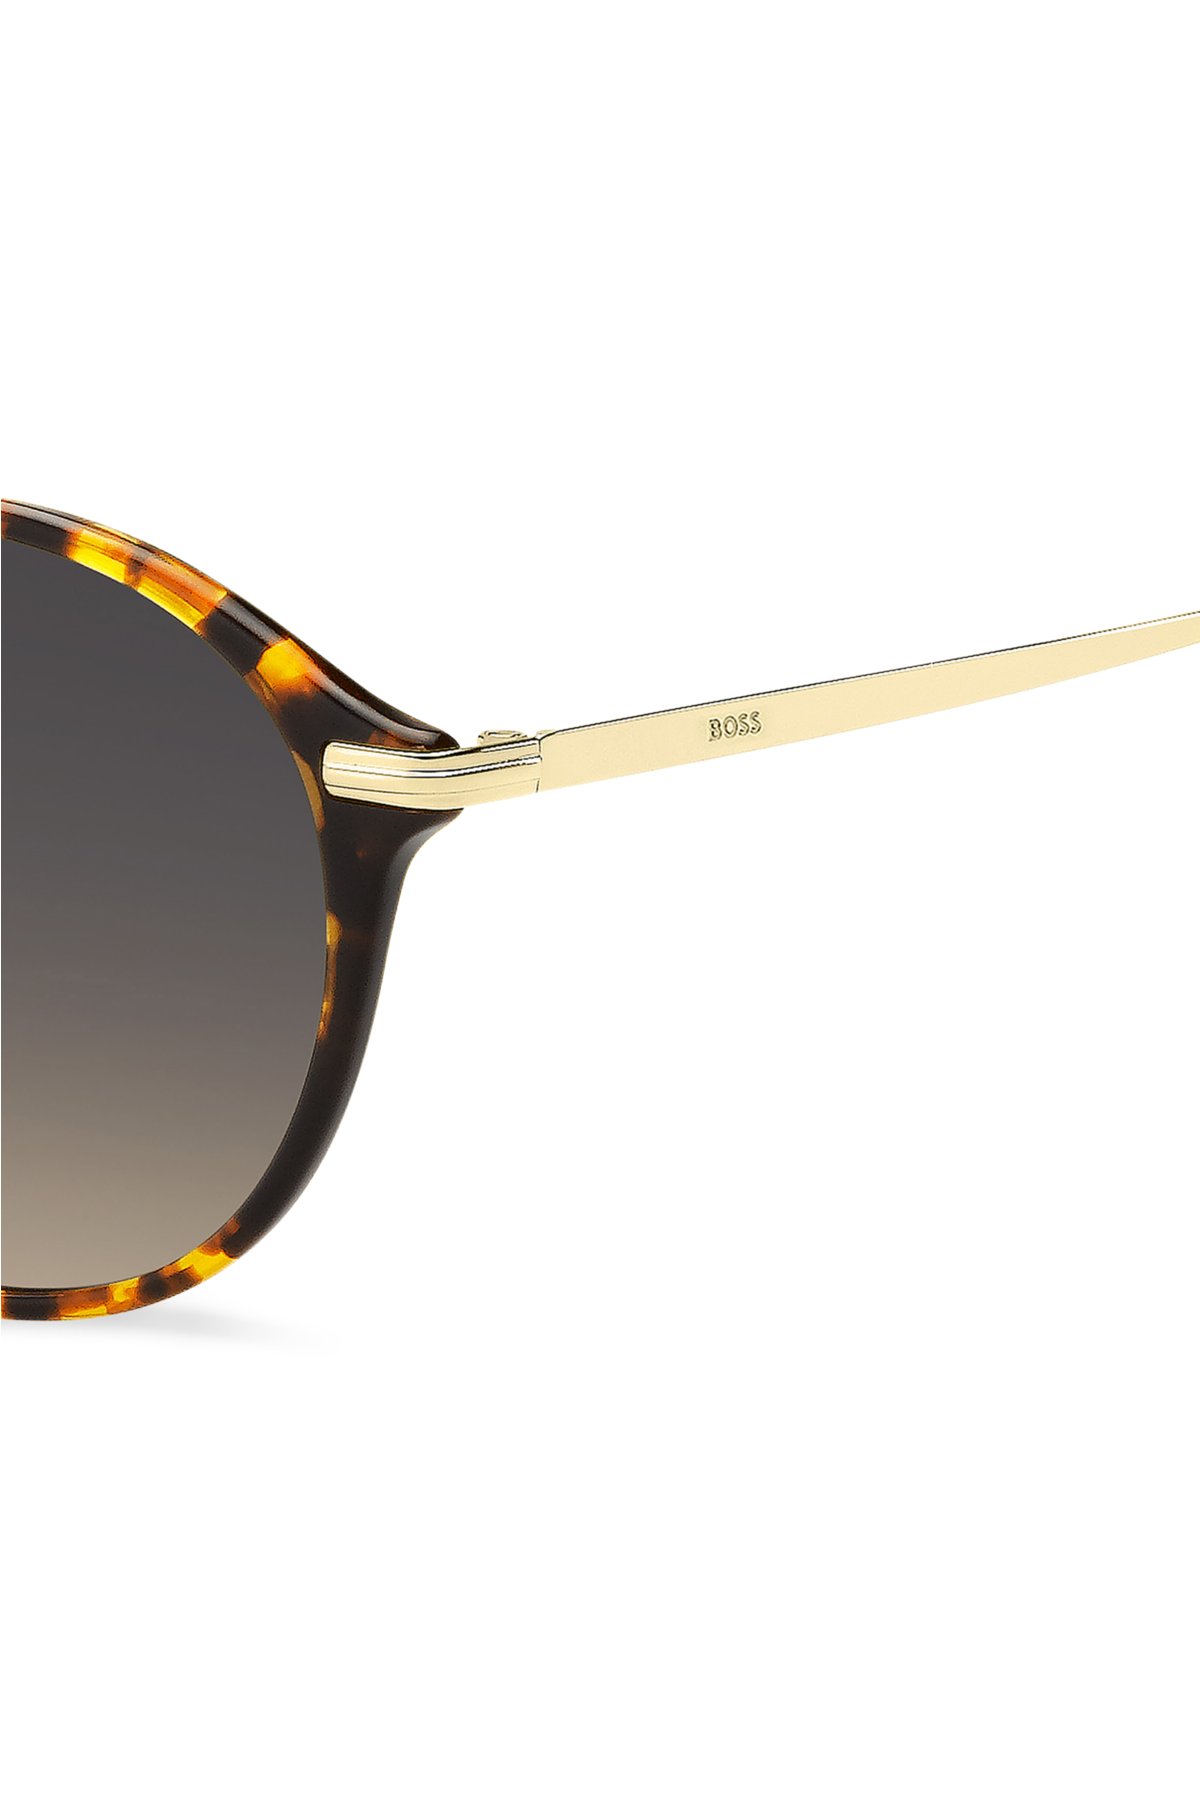 Round sunglasses in Havana acetate with gold-tone temples, Brown